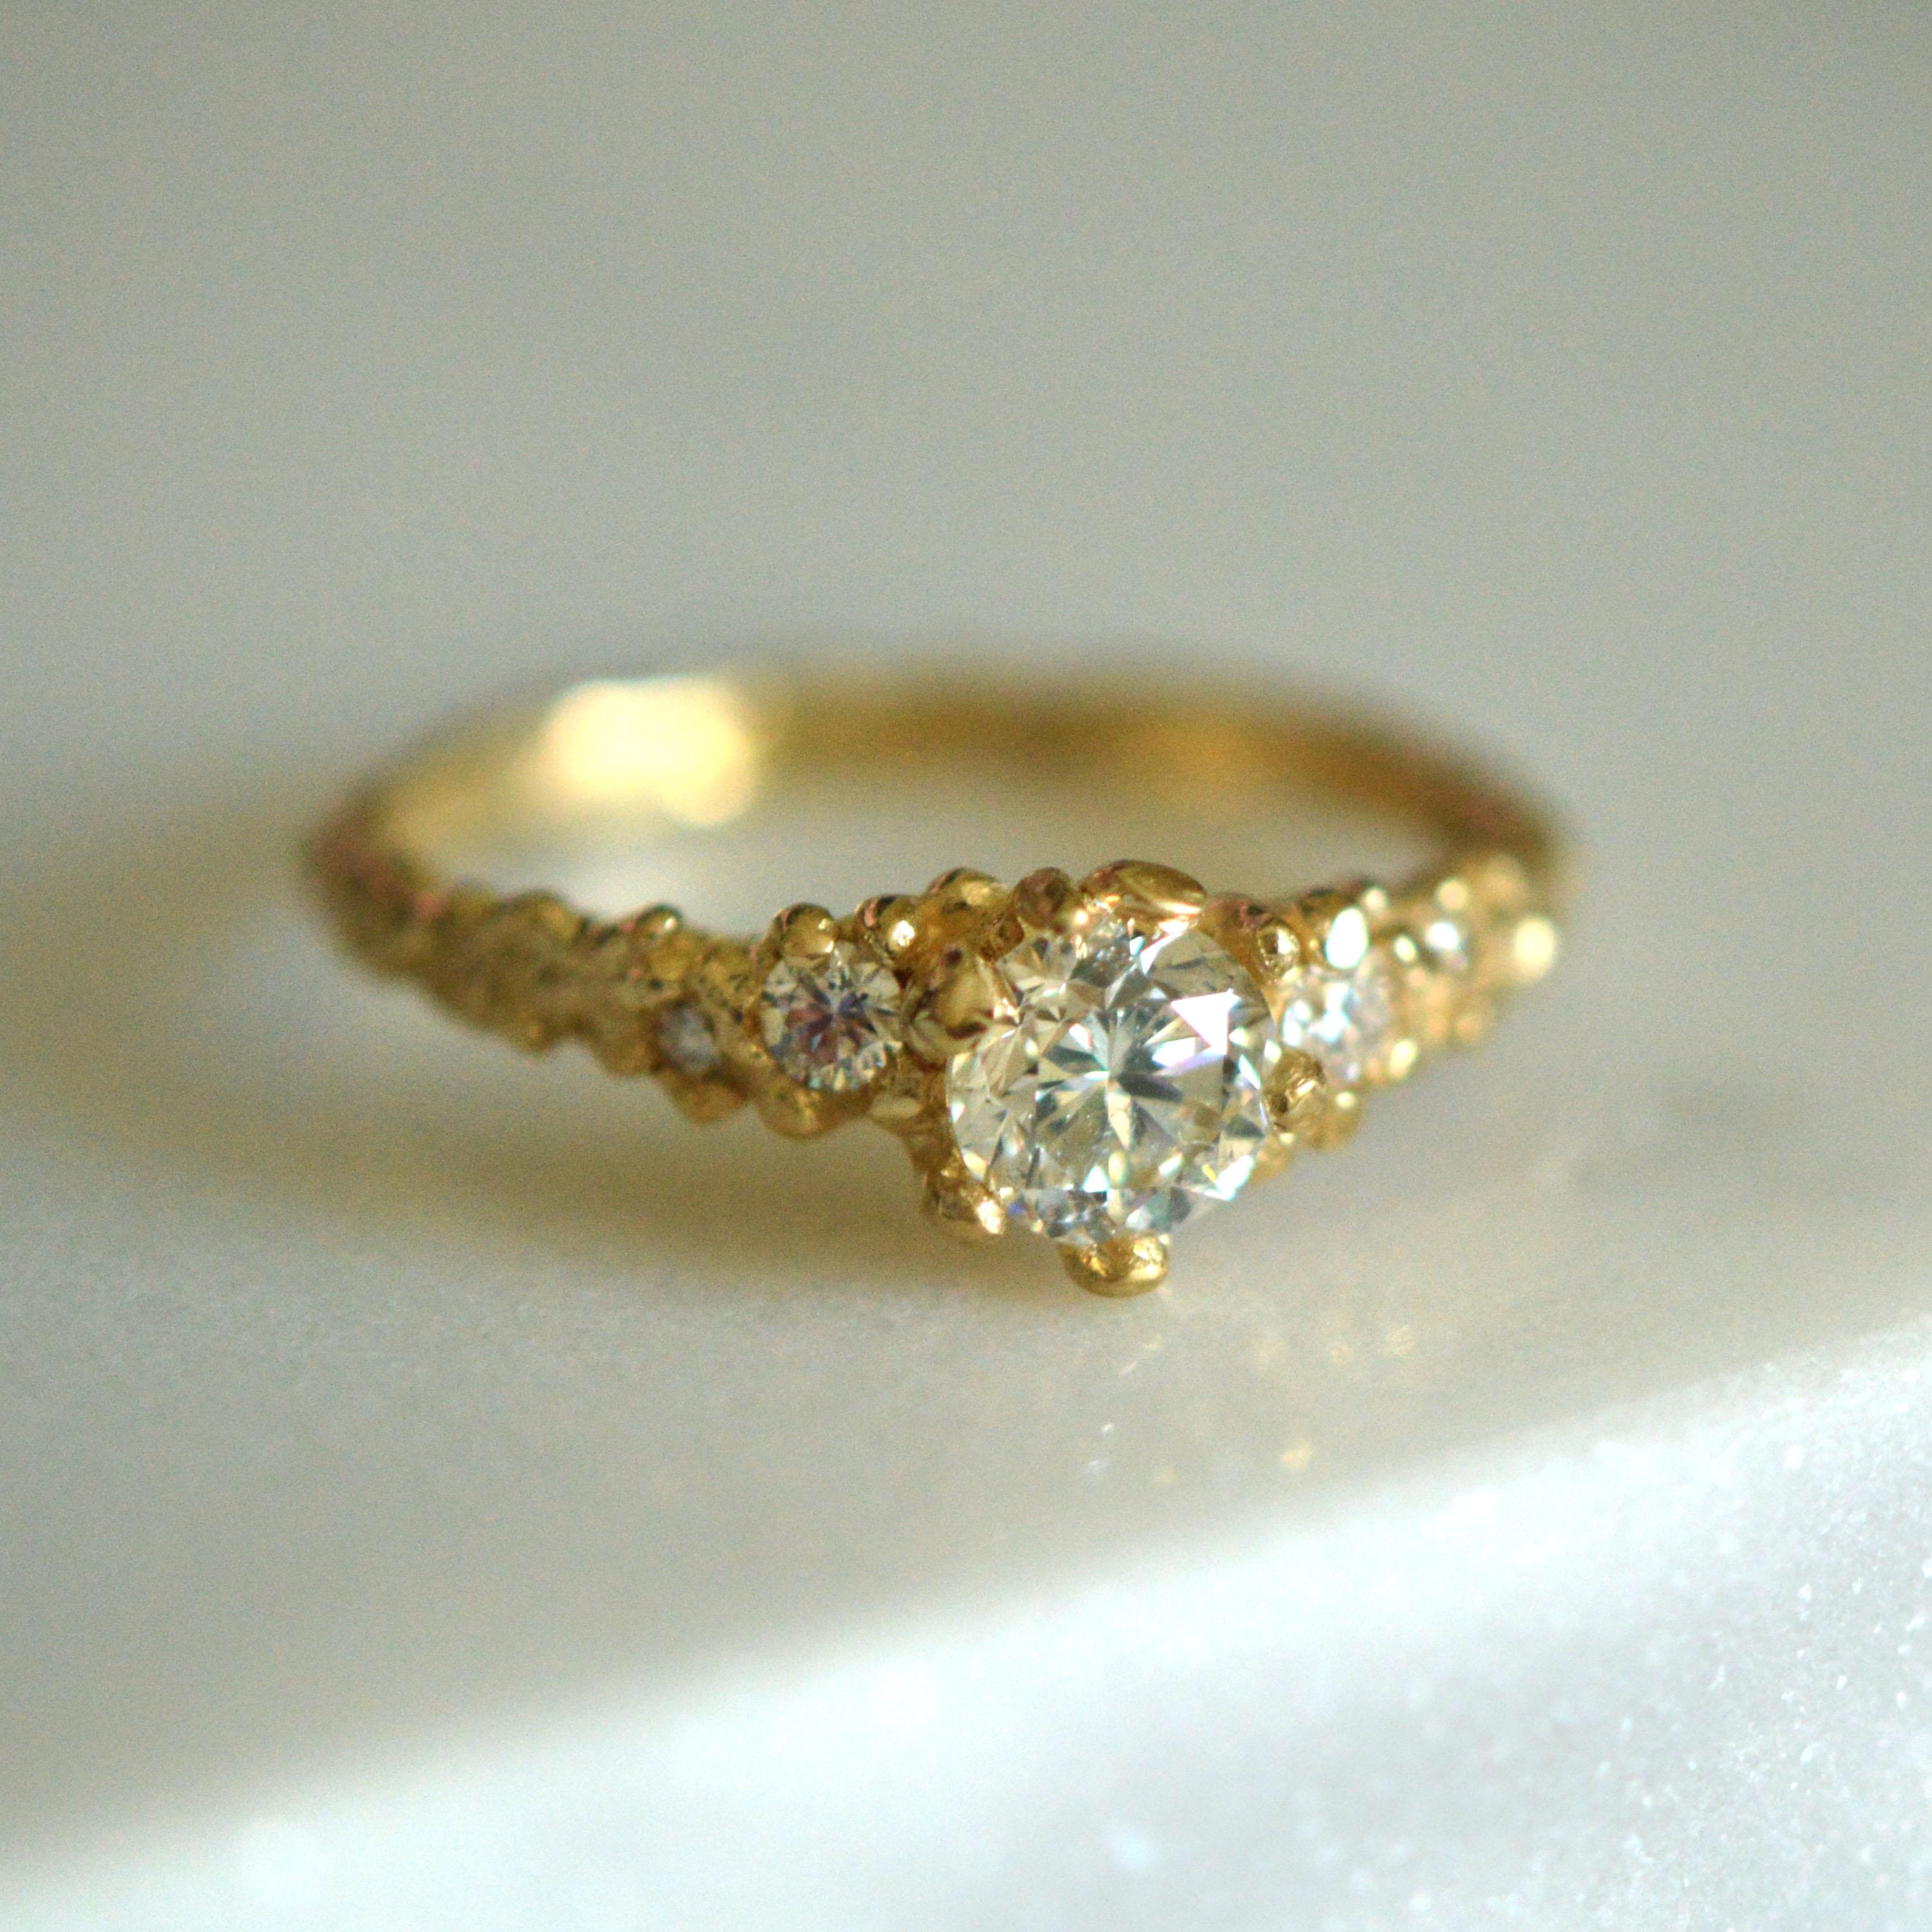 Solid 18 Carat Gold Earth Diamond Ring by Lucy Stopes-Roe For Sale 3